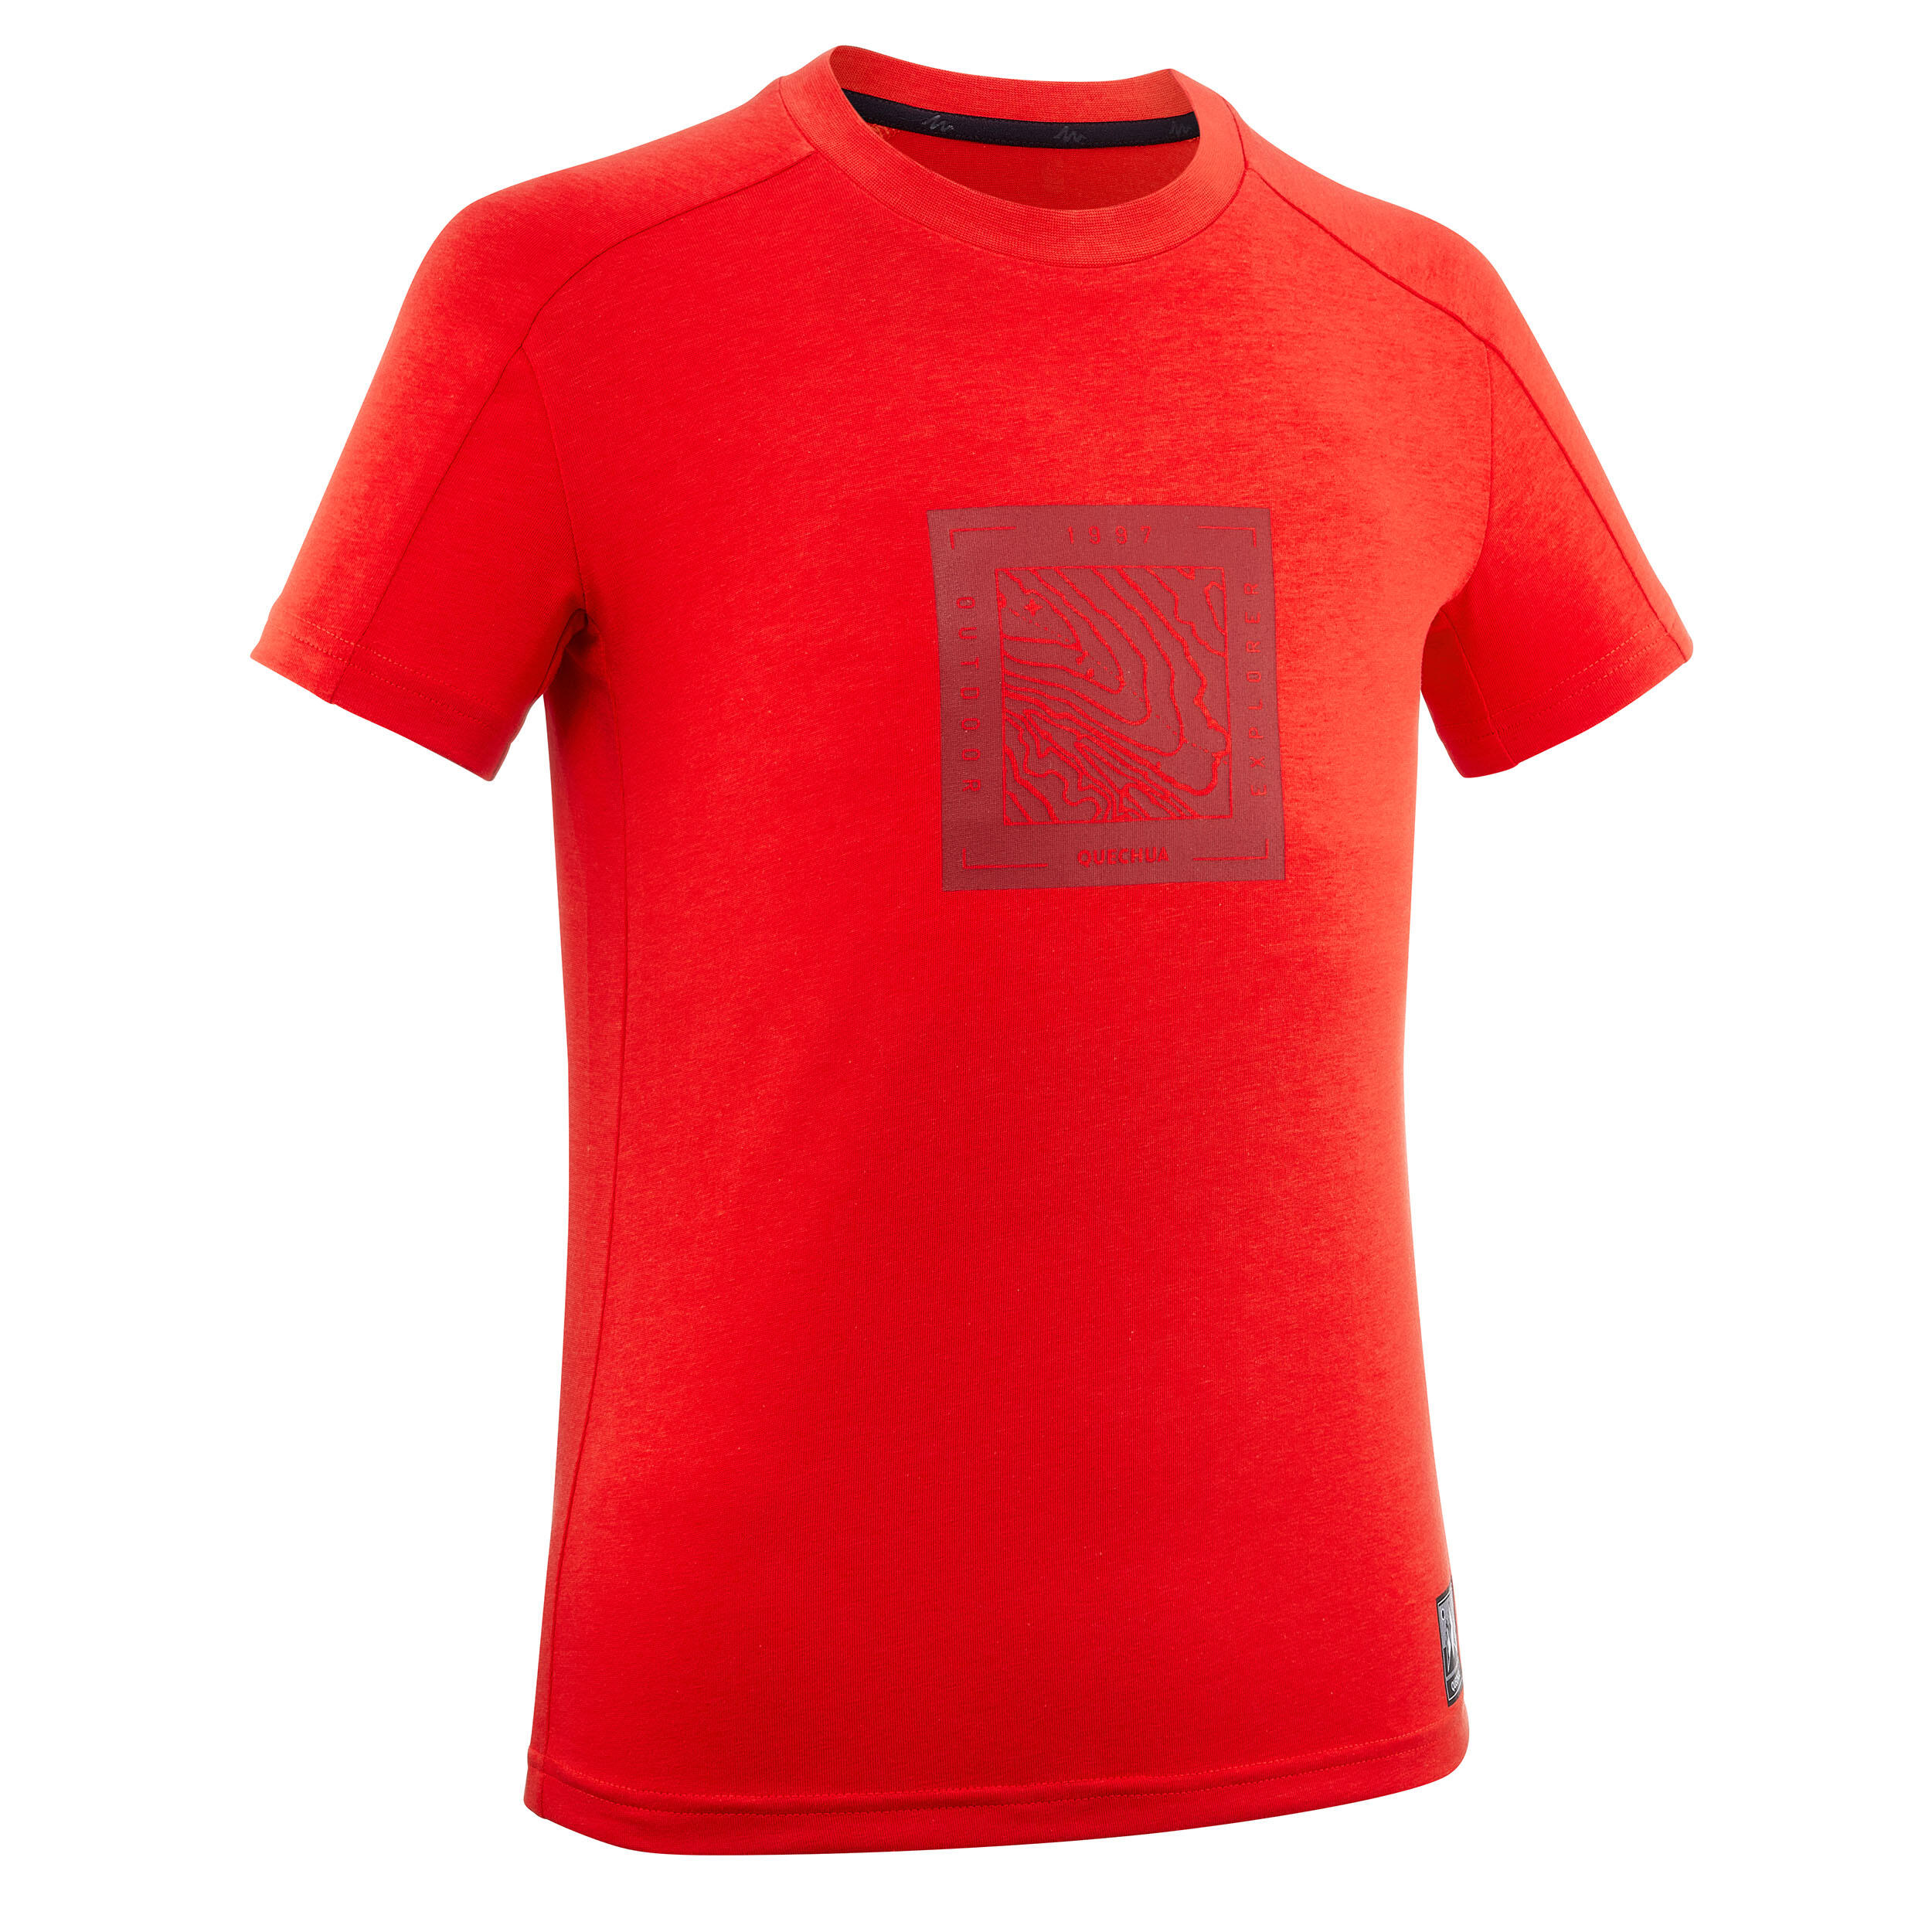 Kids' Hiking T-Shirt - MH100 Aged 7-15 - Red 1/6